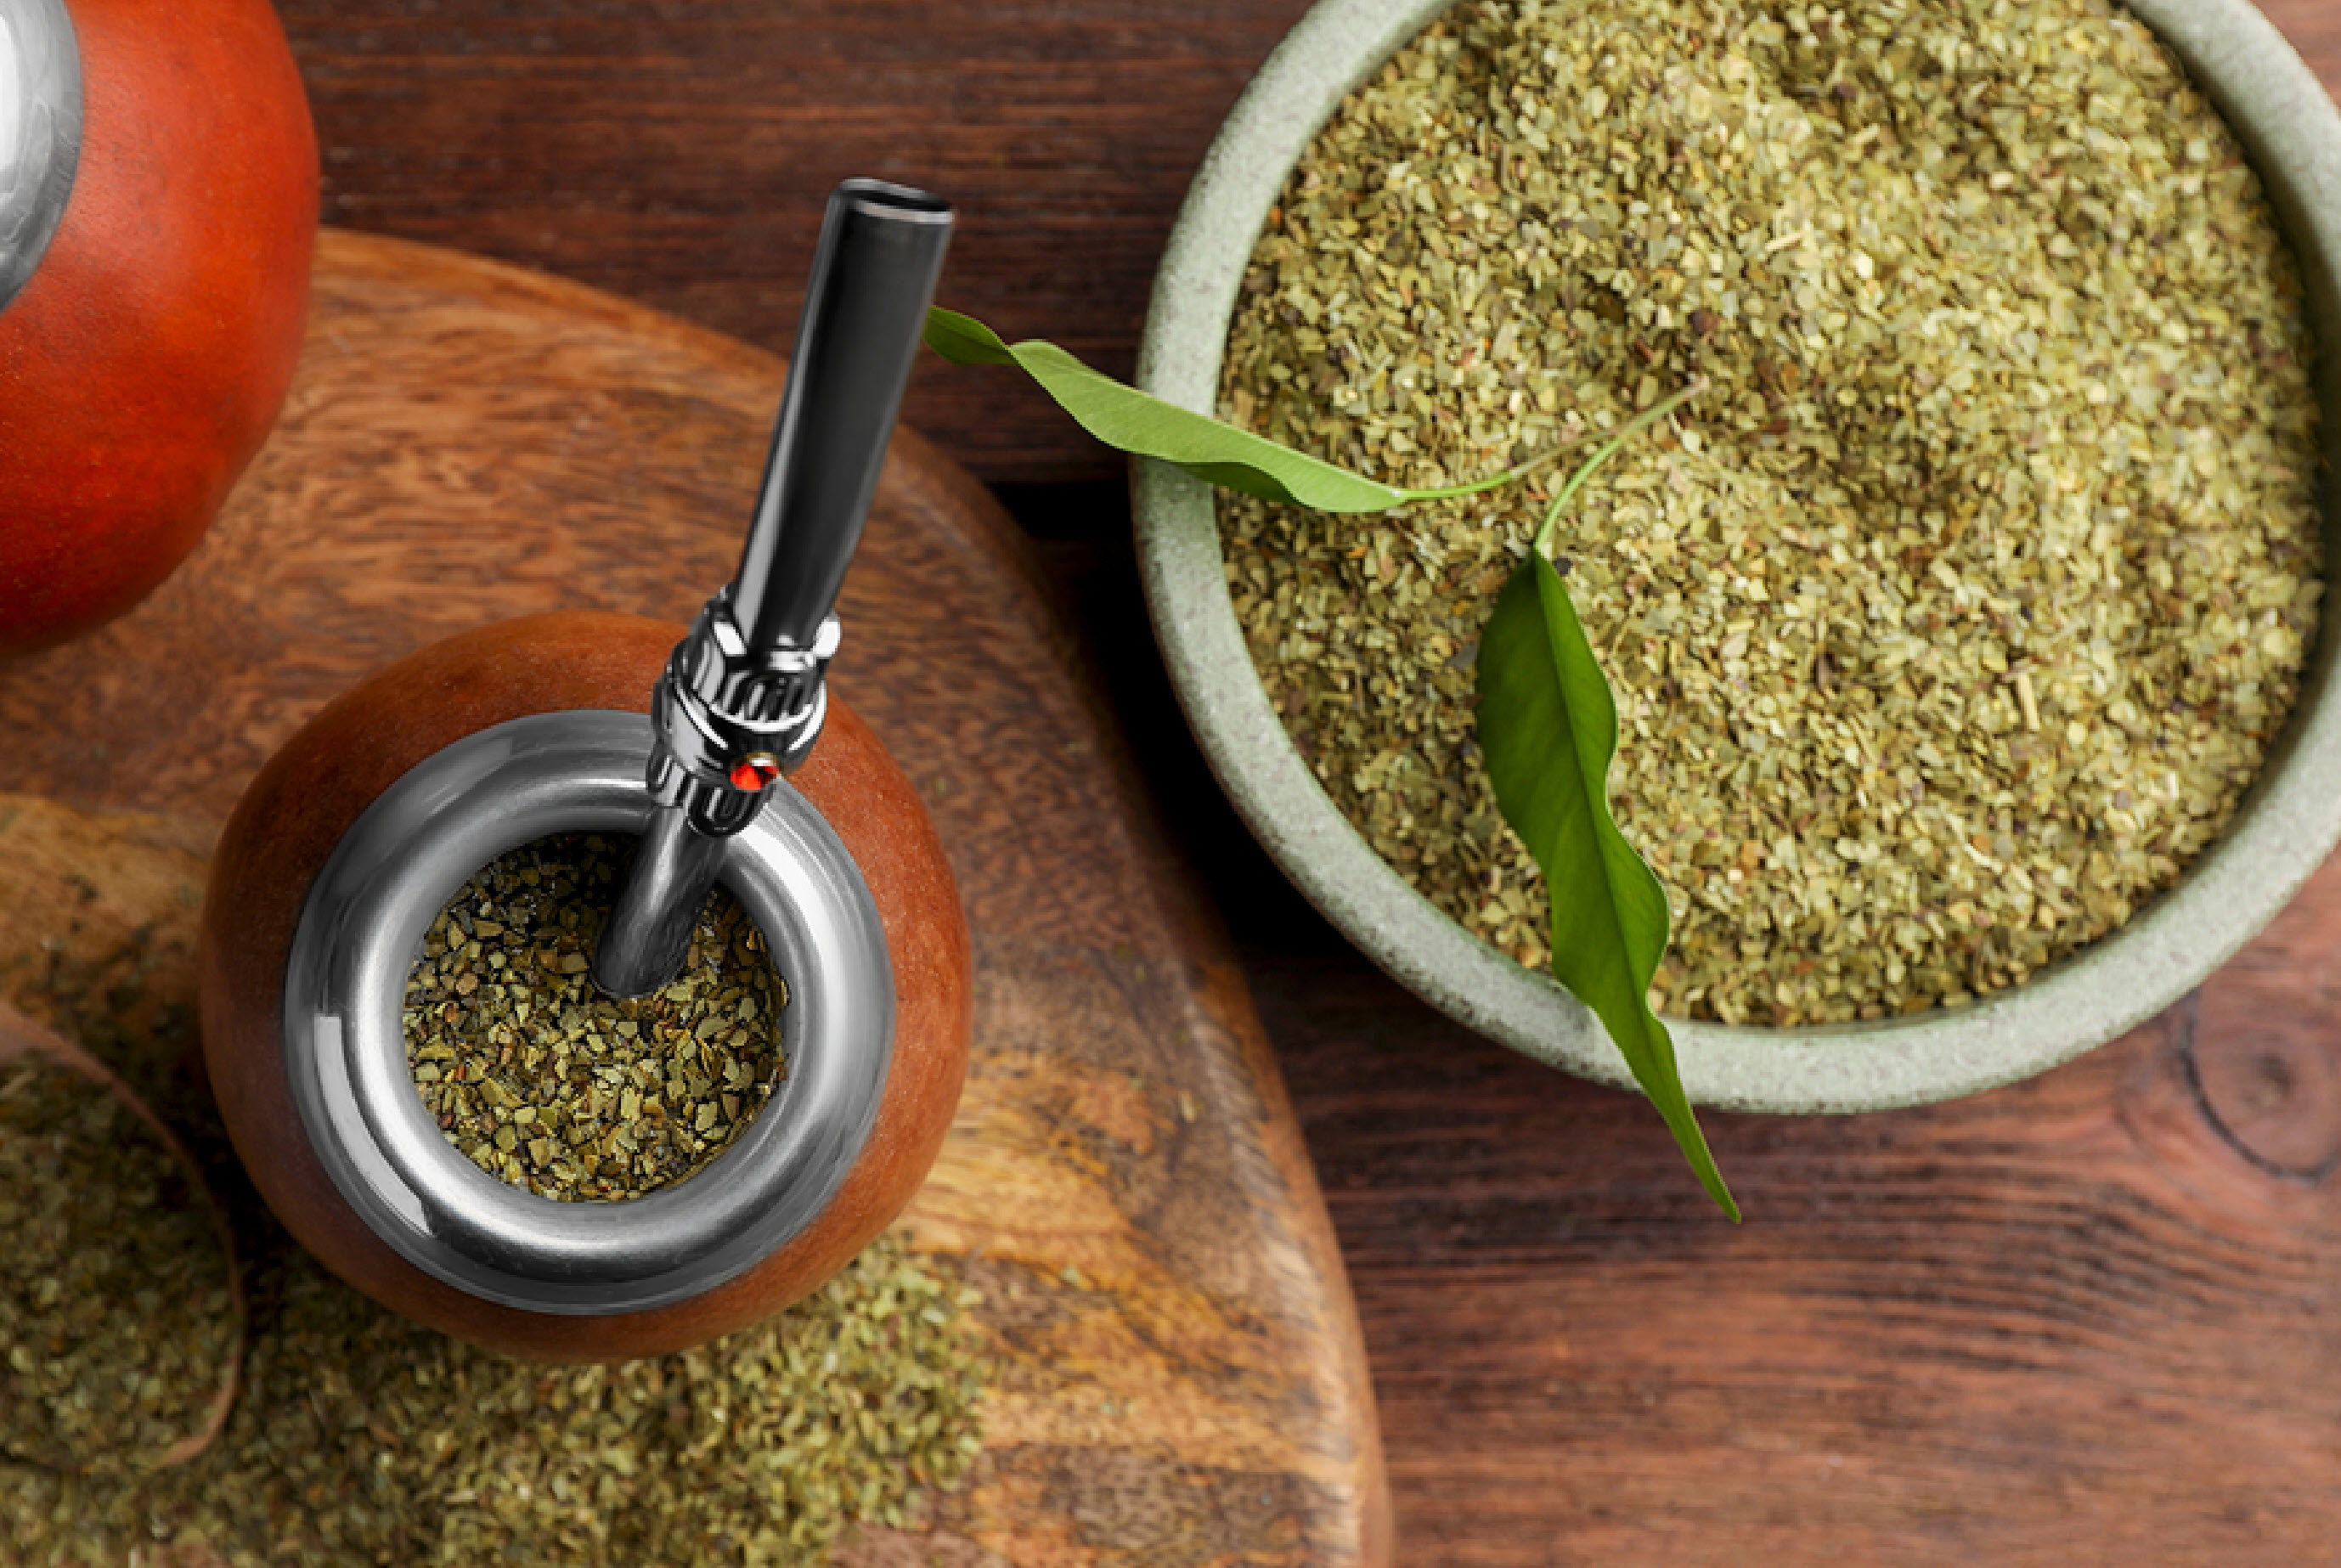 Yerba Mate Market and Consumer Demand Is on The Rise, According to